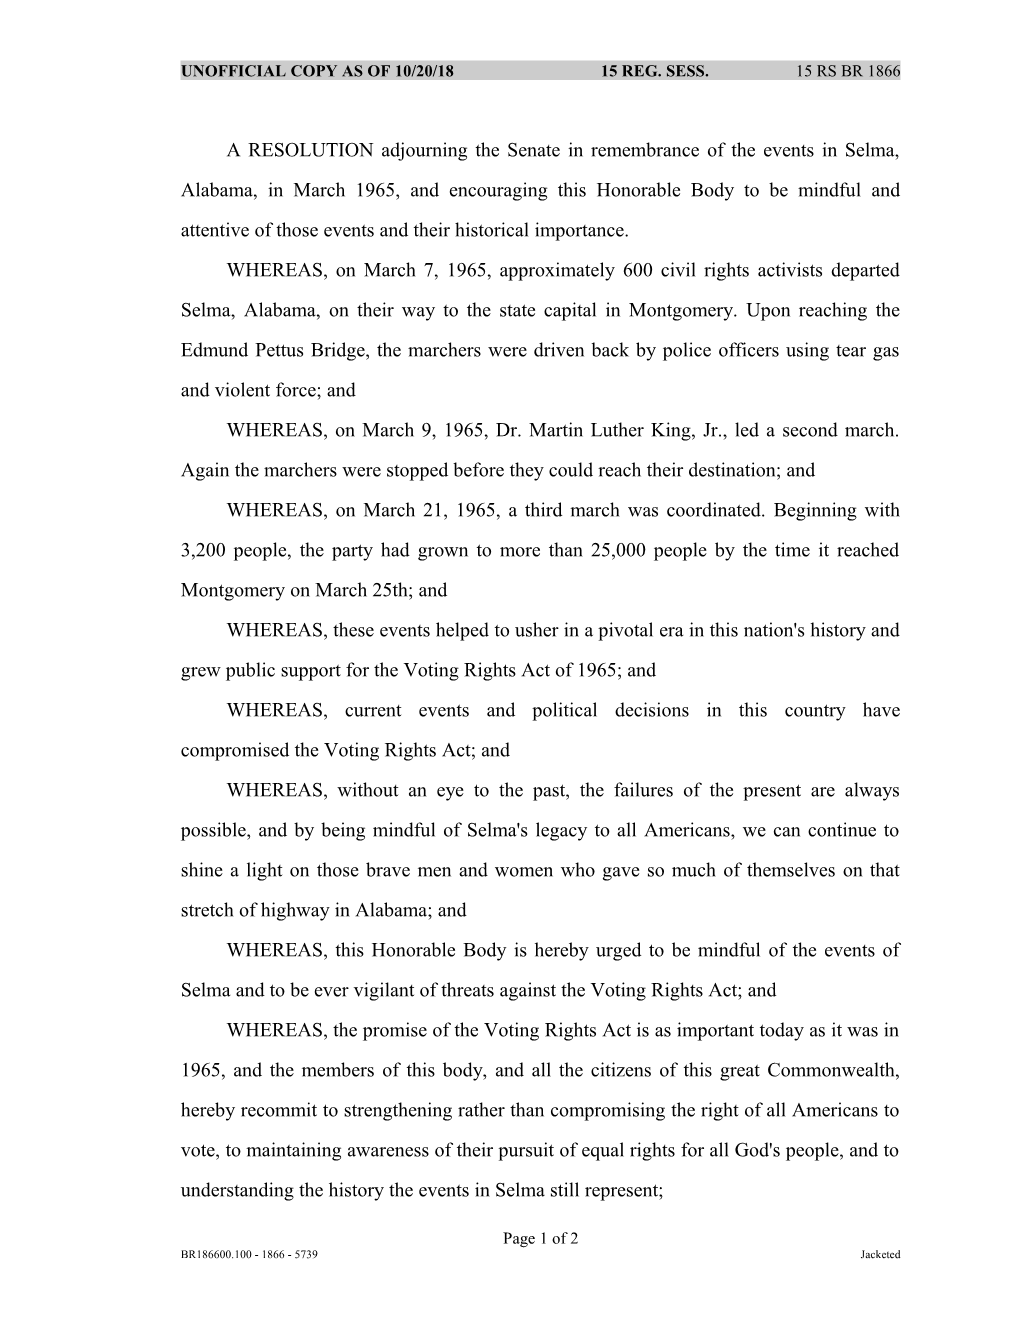 A RESOLUTION Adjourning the Senate in Remembrance of the Events in Selma, Alabama, in March